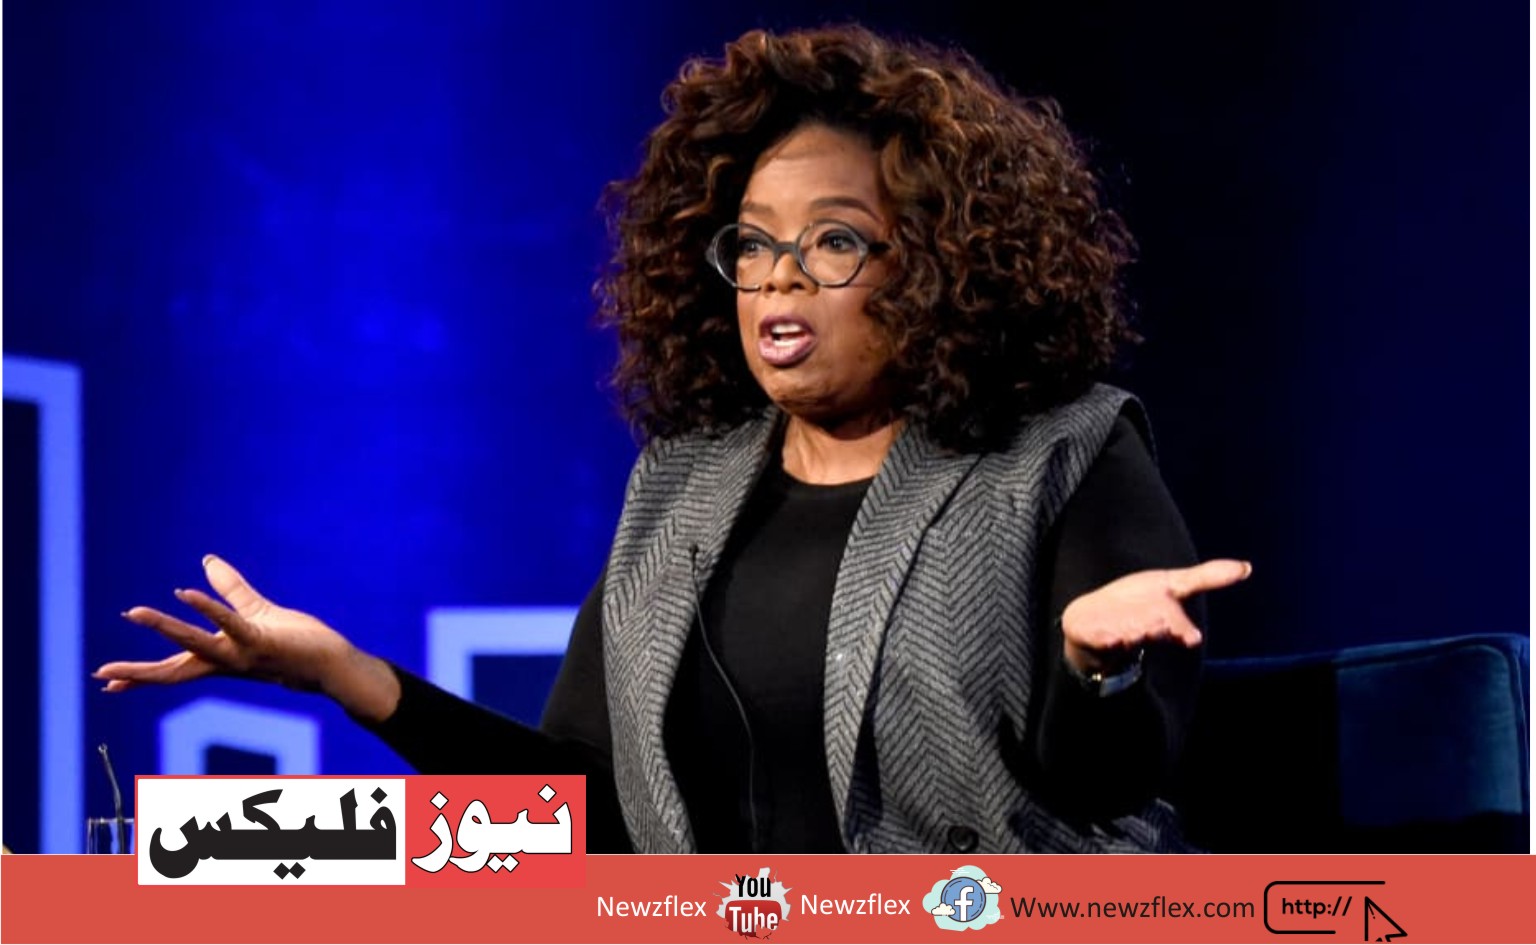 Oprah is an example of someone who has aligned her passion with her career.